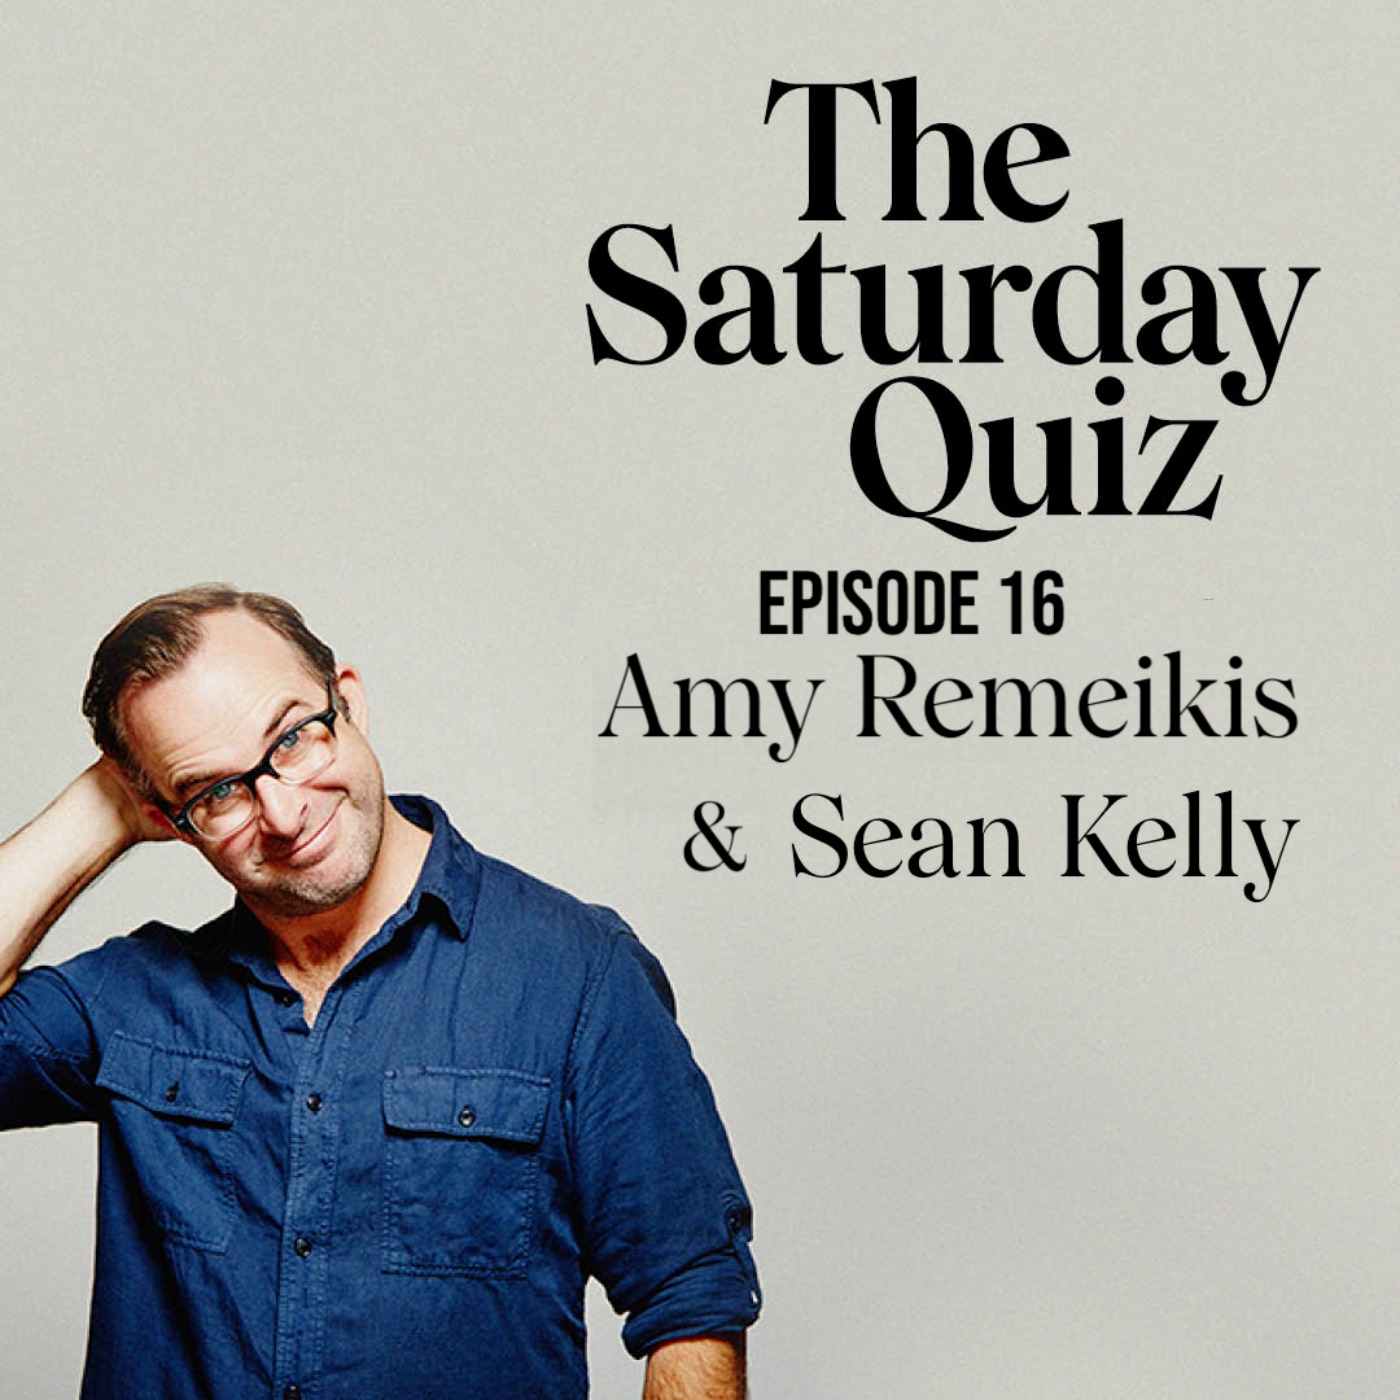 Election with Amy Remeikis and Sean Kelly